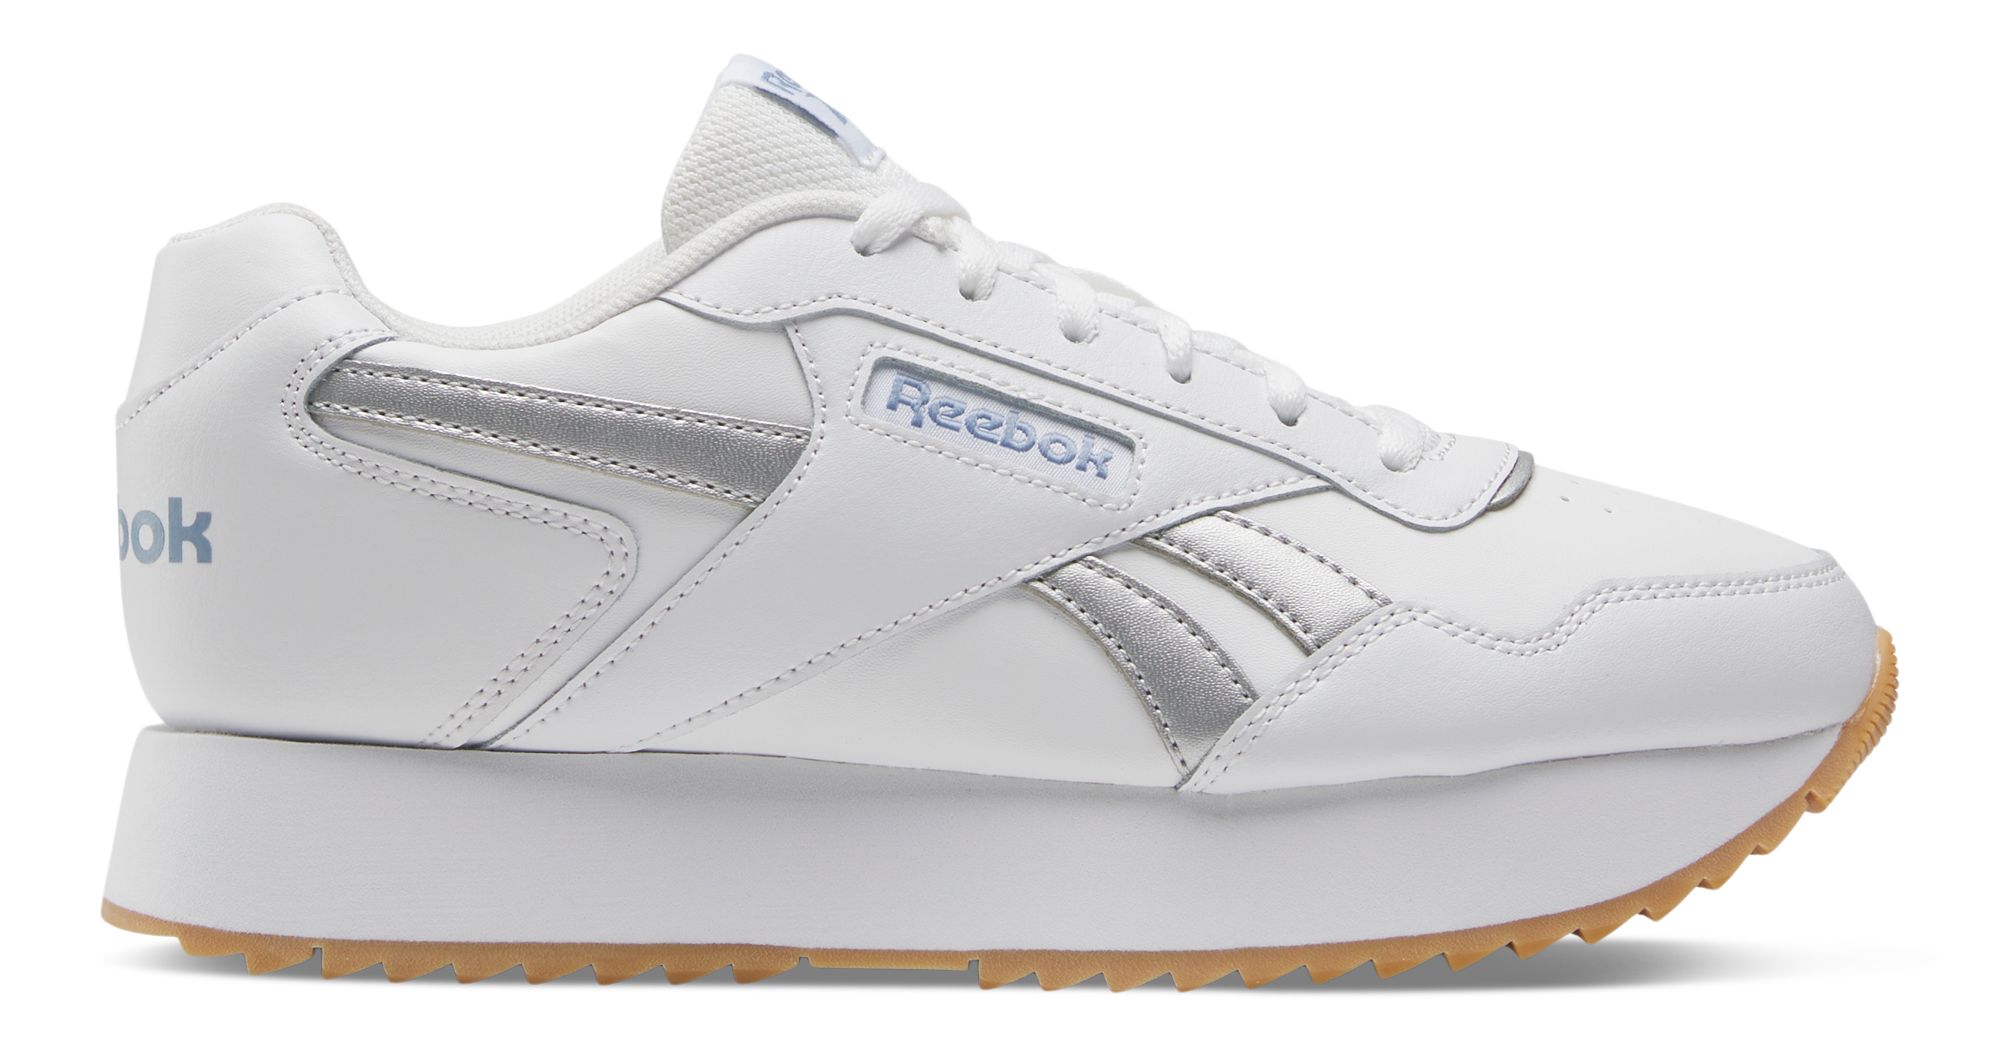 Image of Reebok Women's Glide Ripple Double Casual Shoes Sneakers